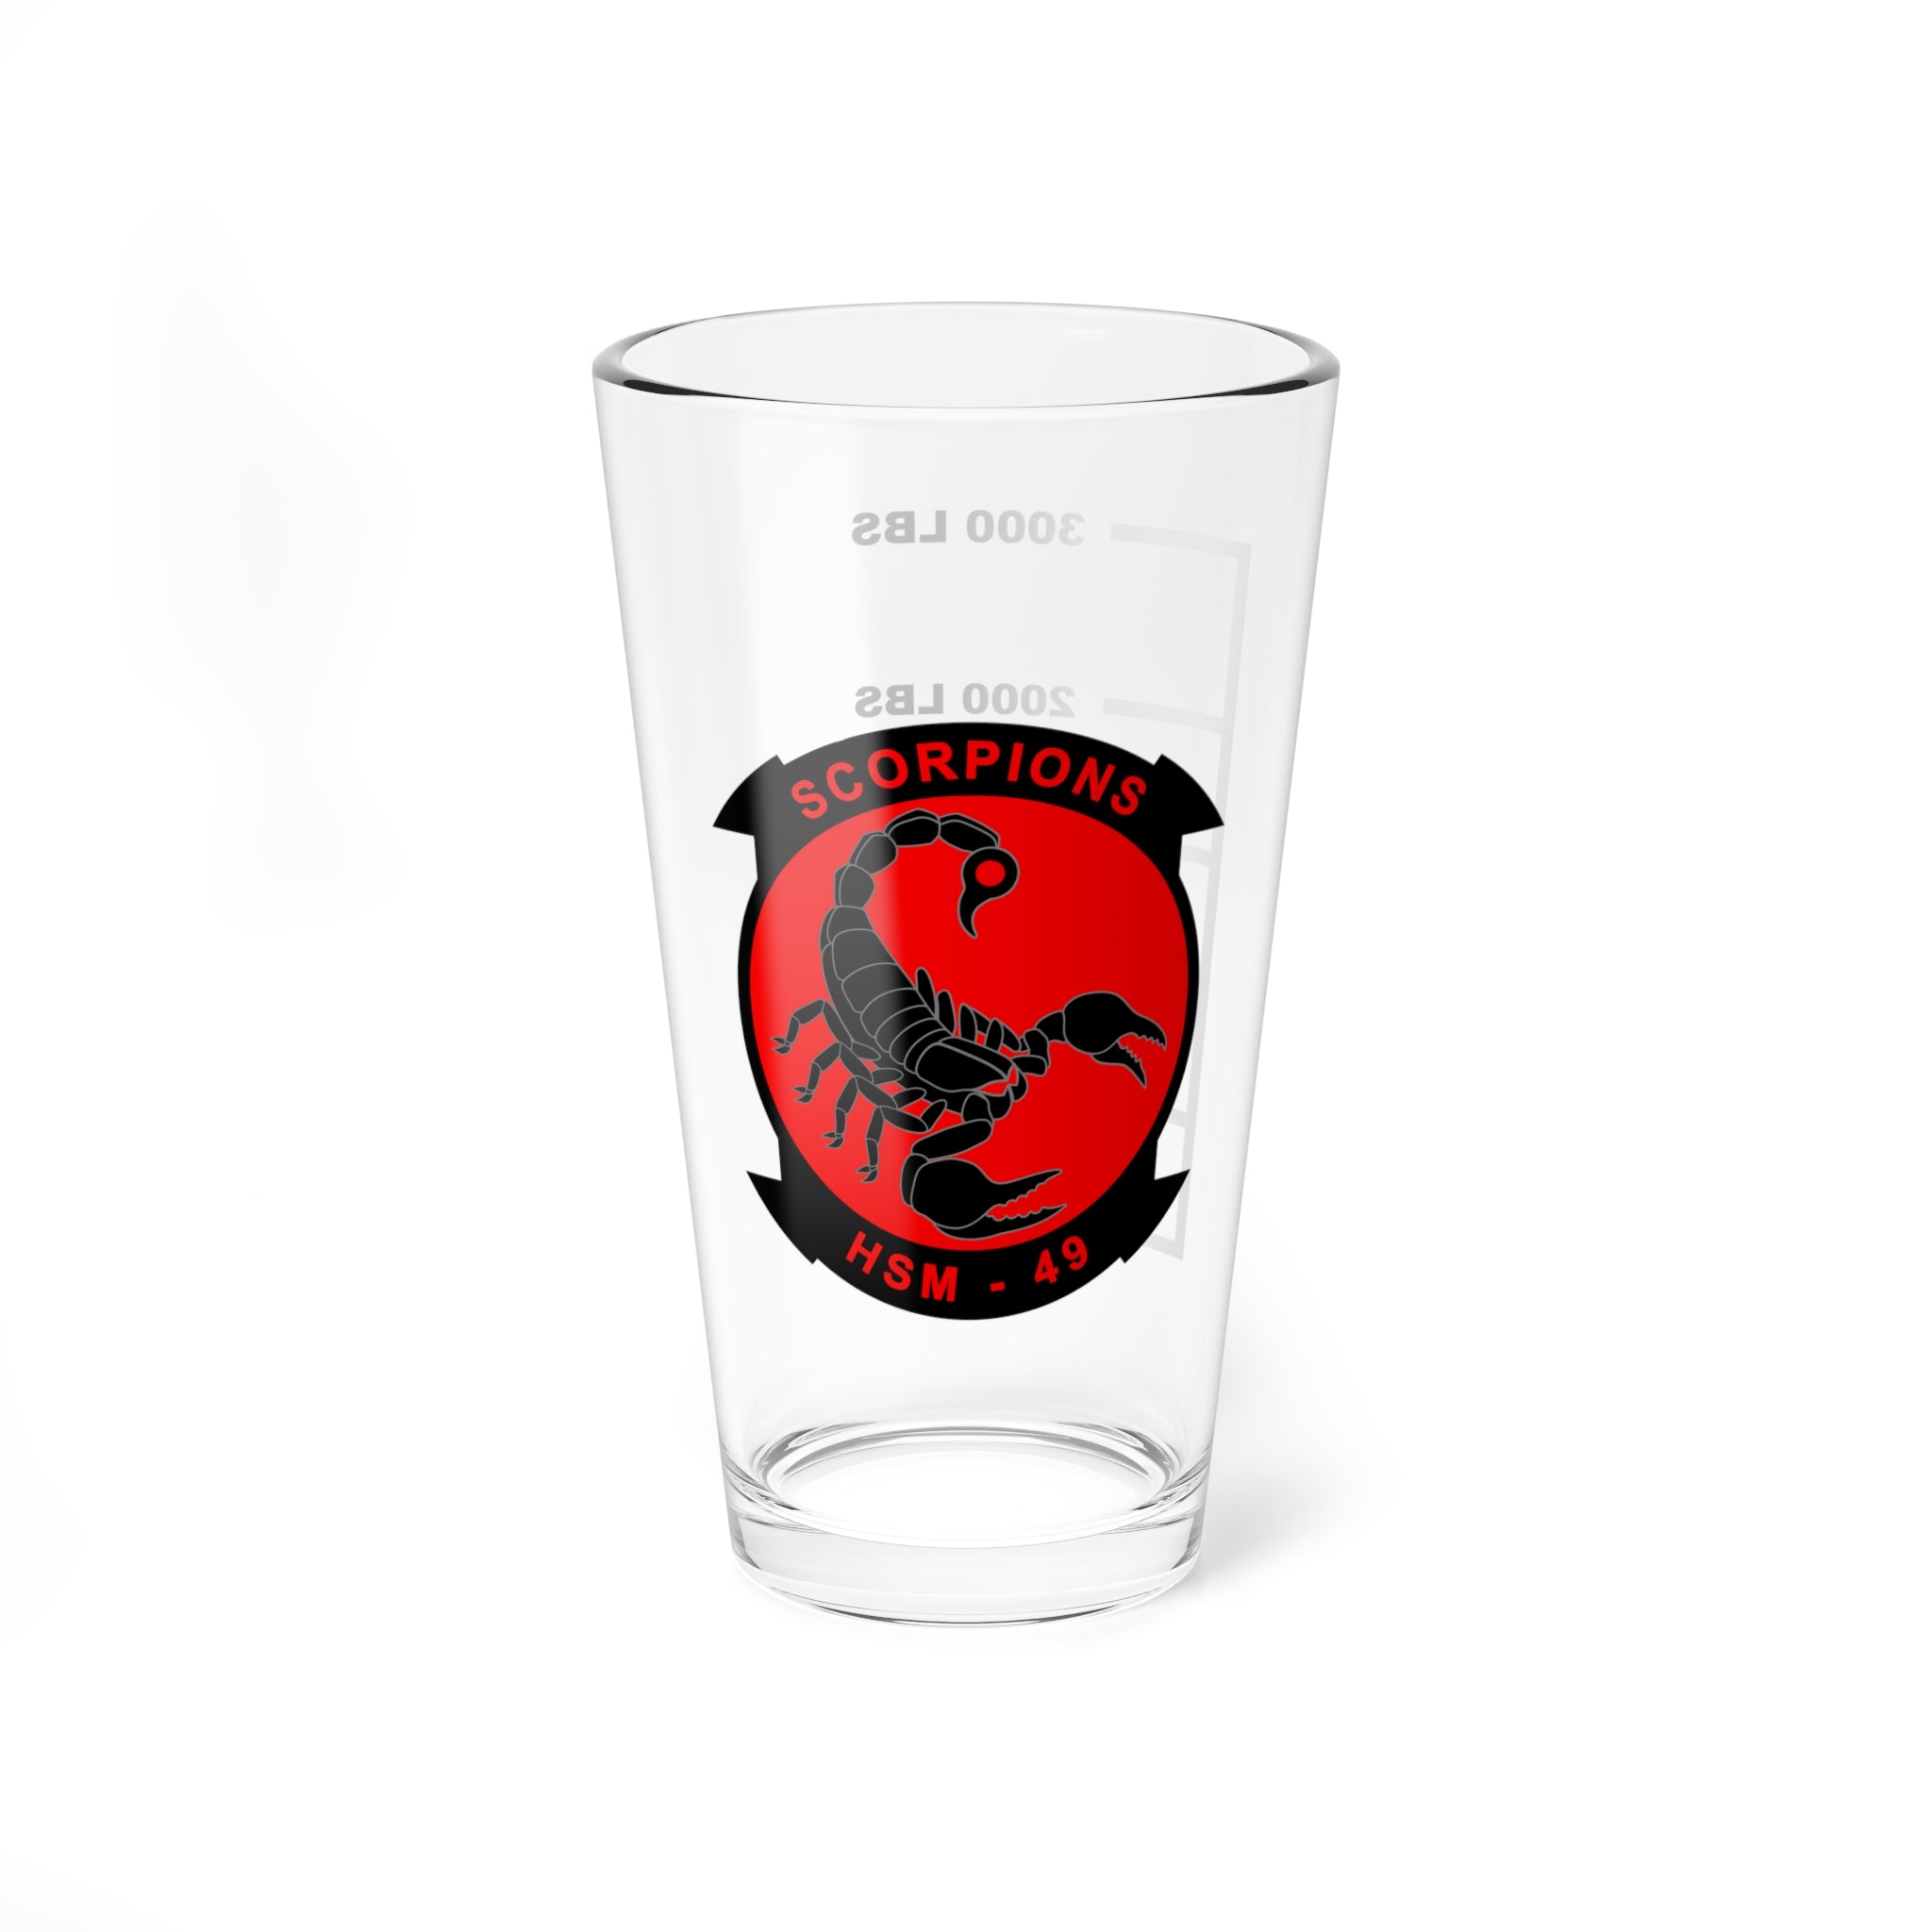 HSM-49 "Scorpions" Fuel Low Pint Glass, Navy Helicopter Maritime Strike Squadron flying the MH-60R